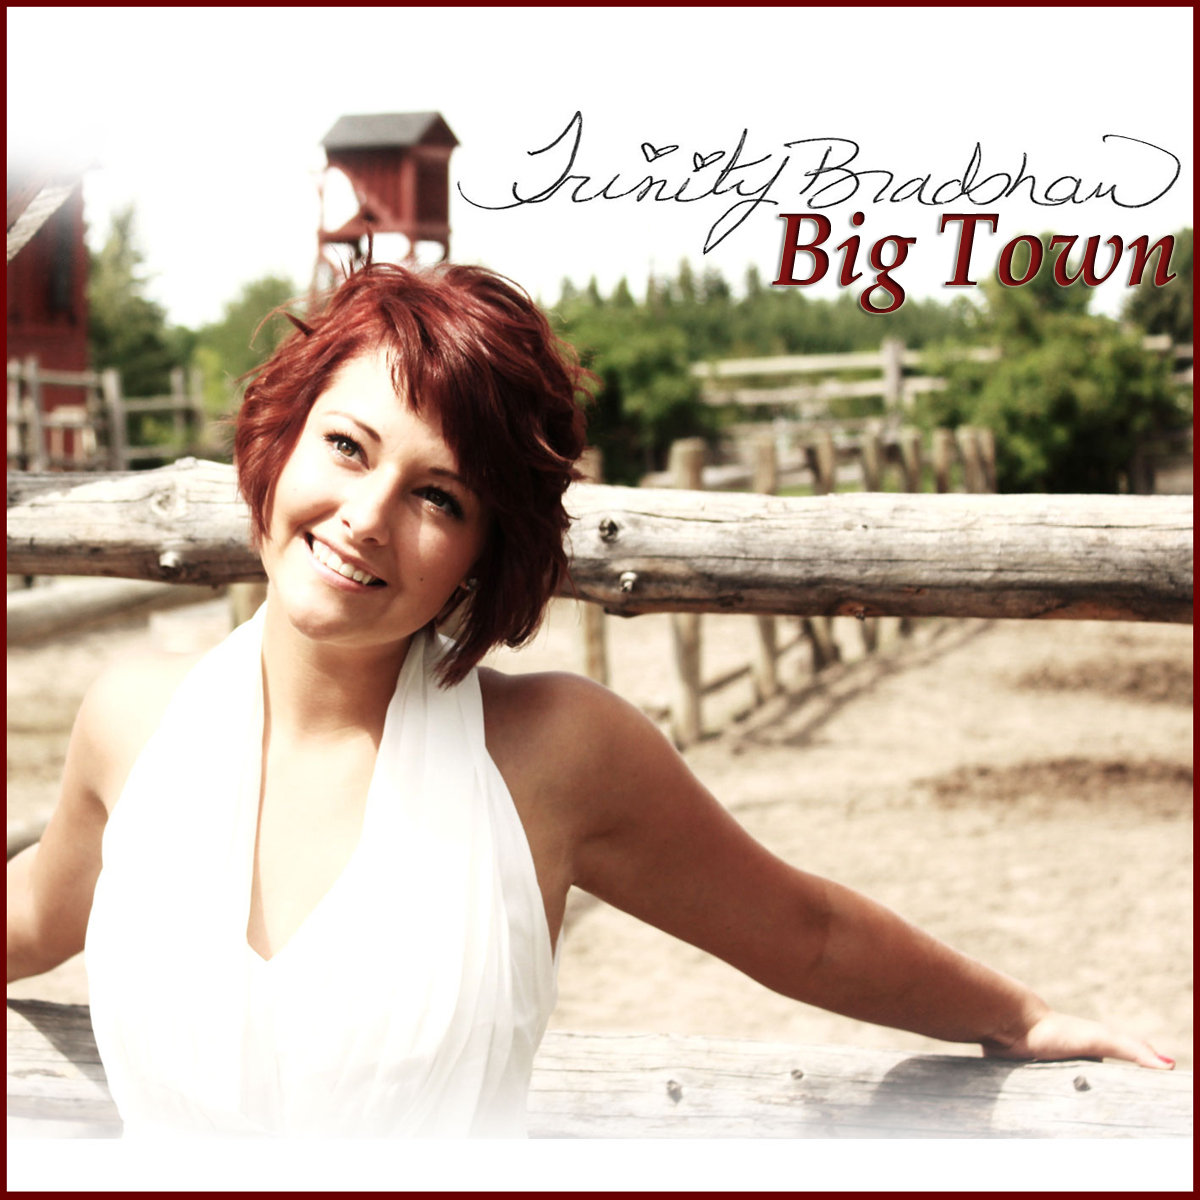 BIG TOWN EP-COVER.jpg